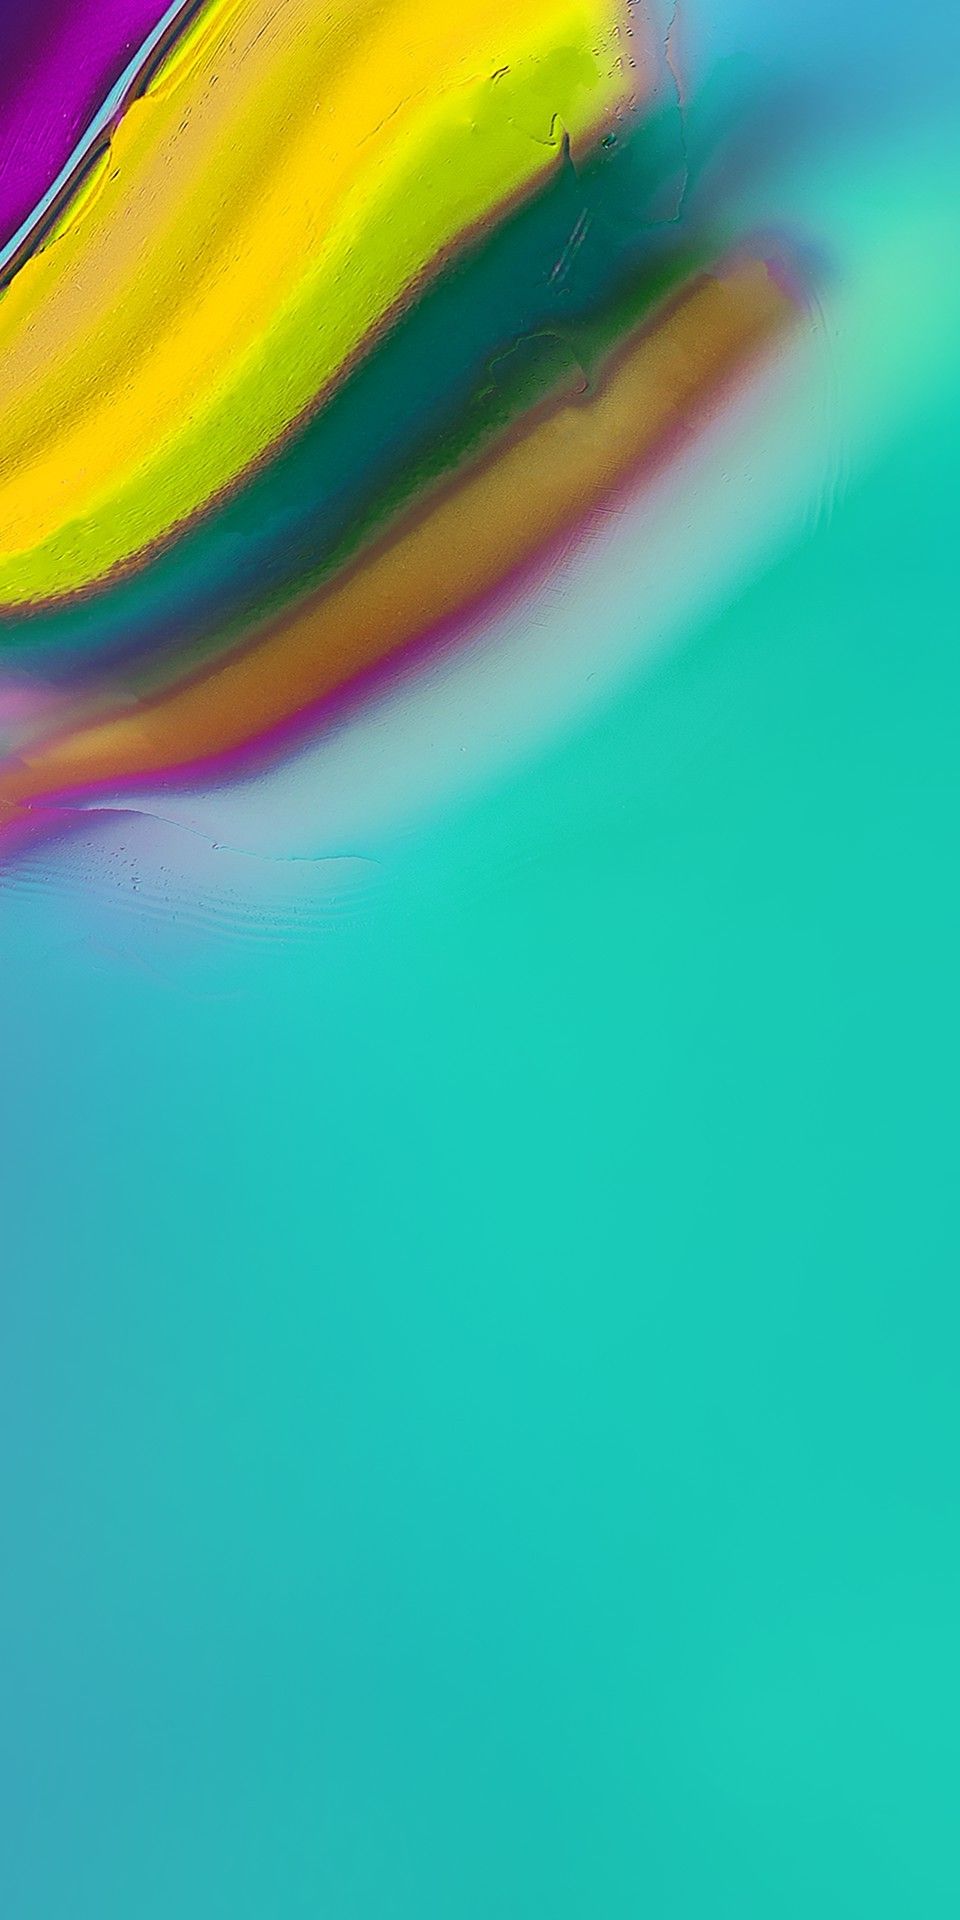 Galaxy tab s5e Oneplus wallpapers Phone background wallpaper